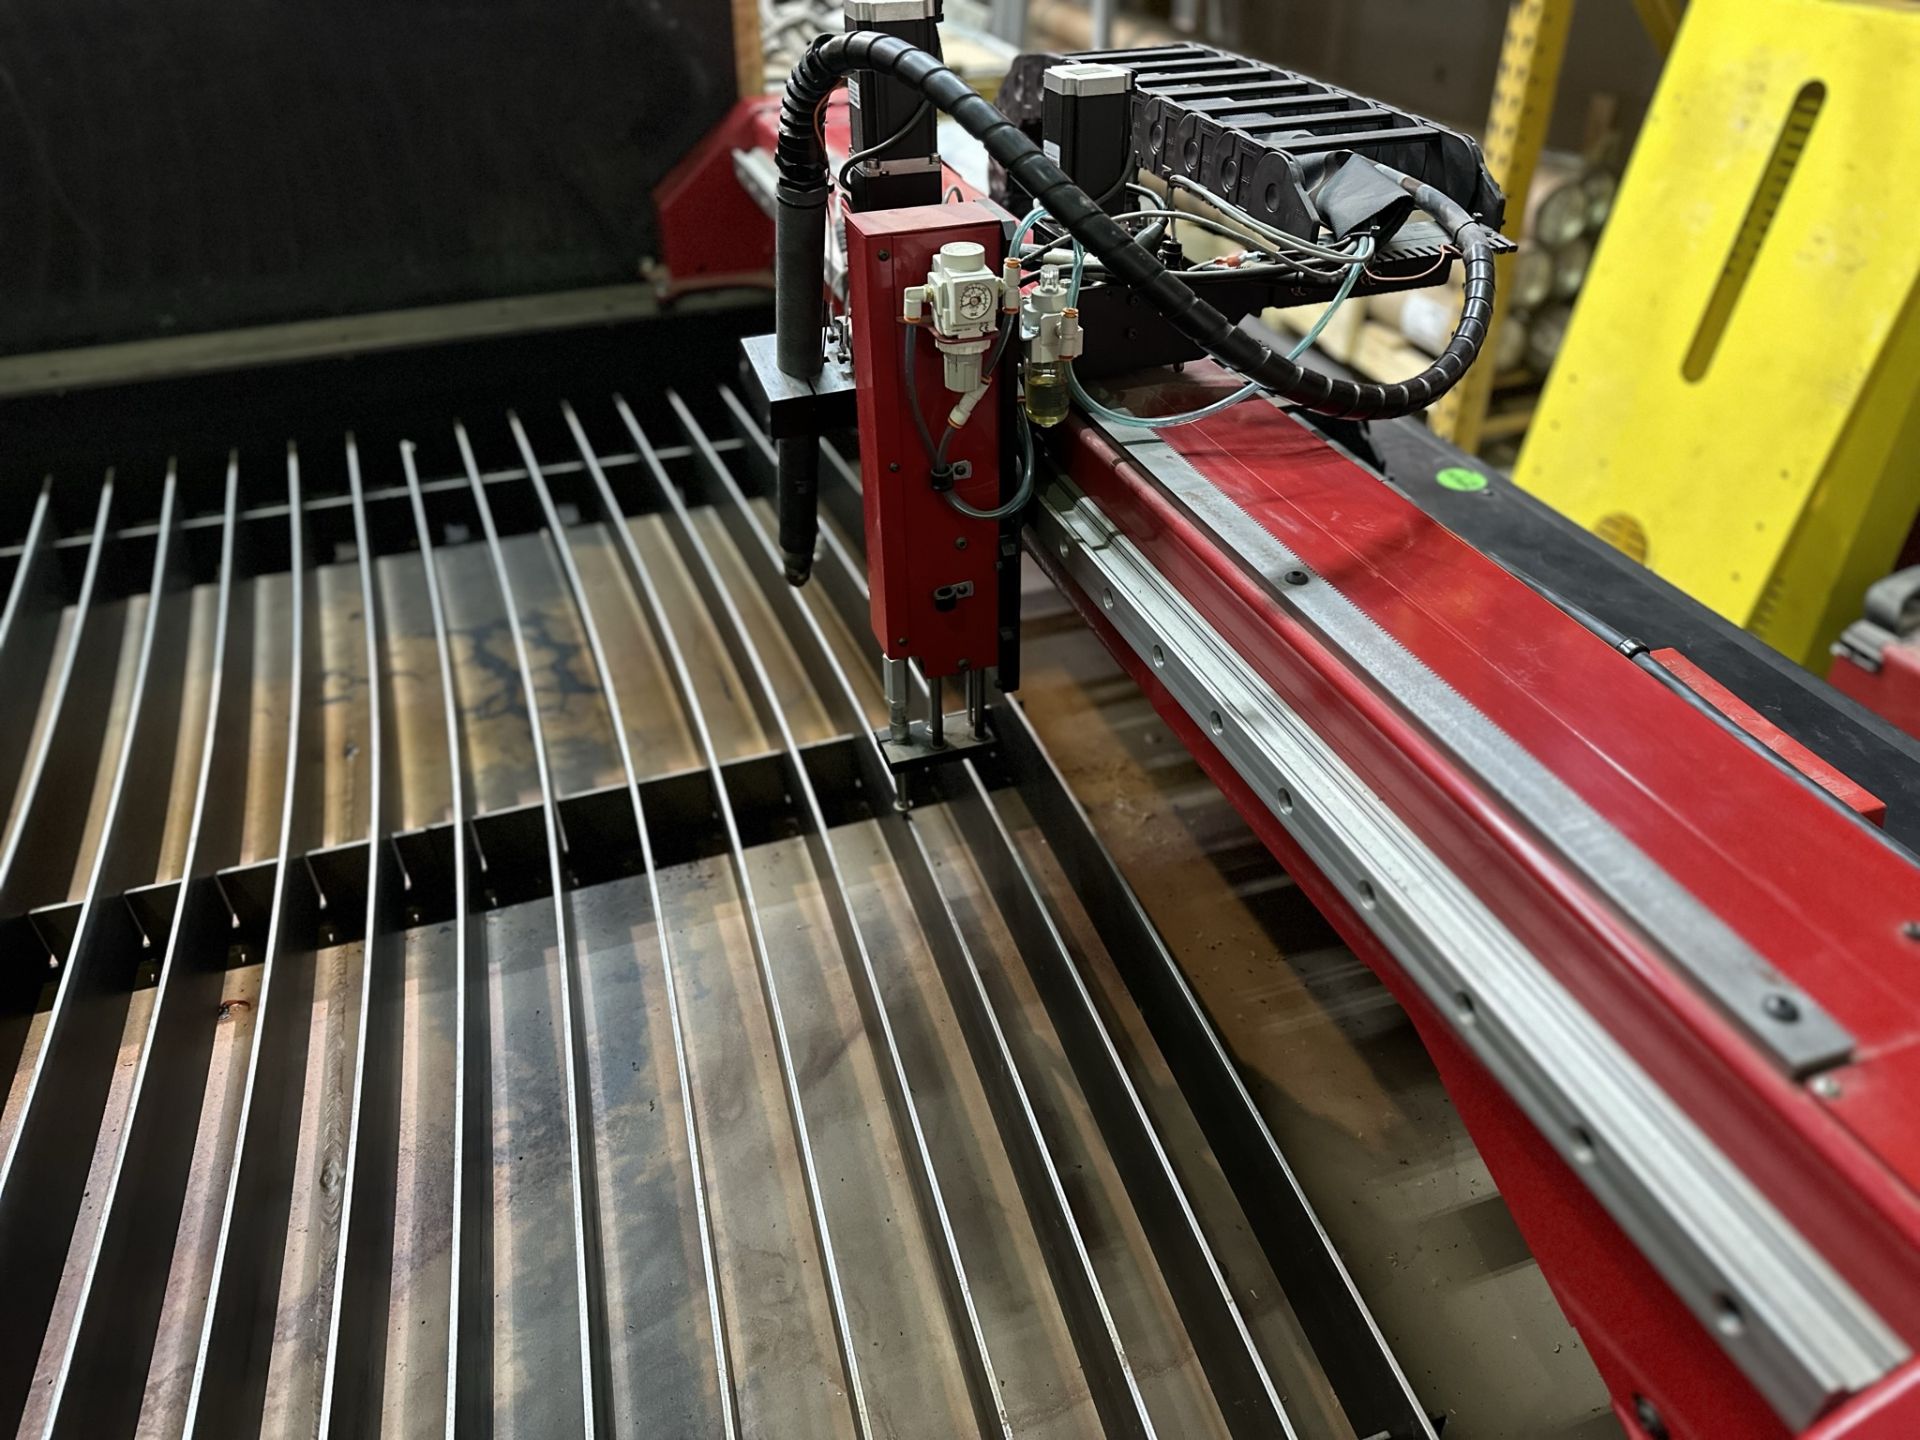 2020 Lincoln Electric Torchmate X CNC Plasma Water Table - Image 2 of 14